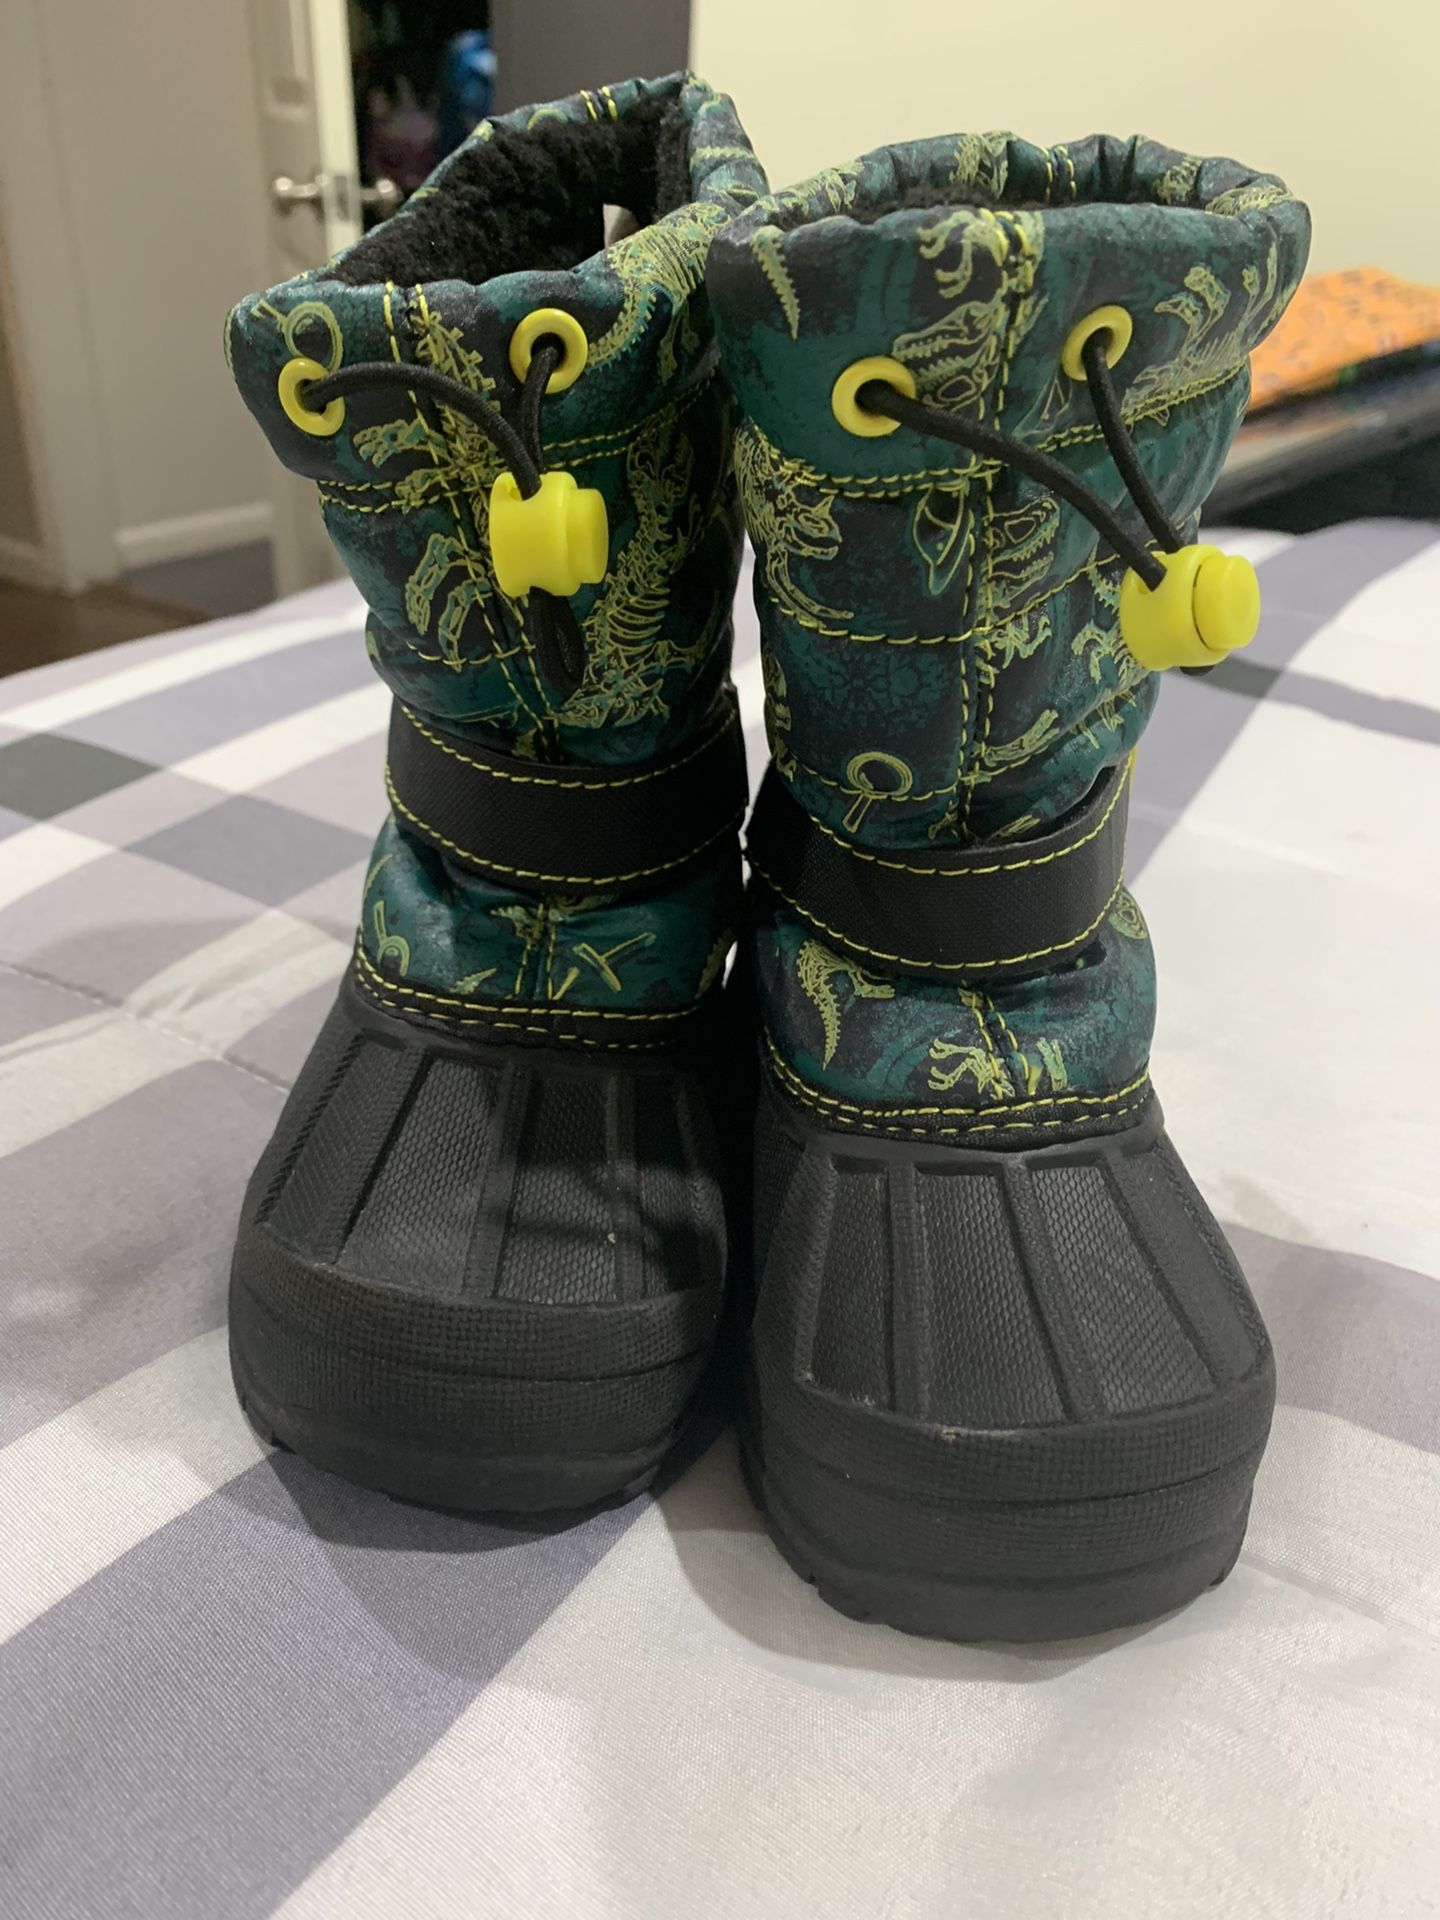 Snow boots (size 6T)